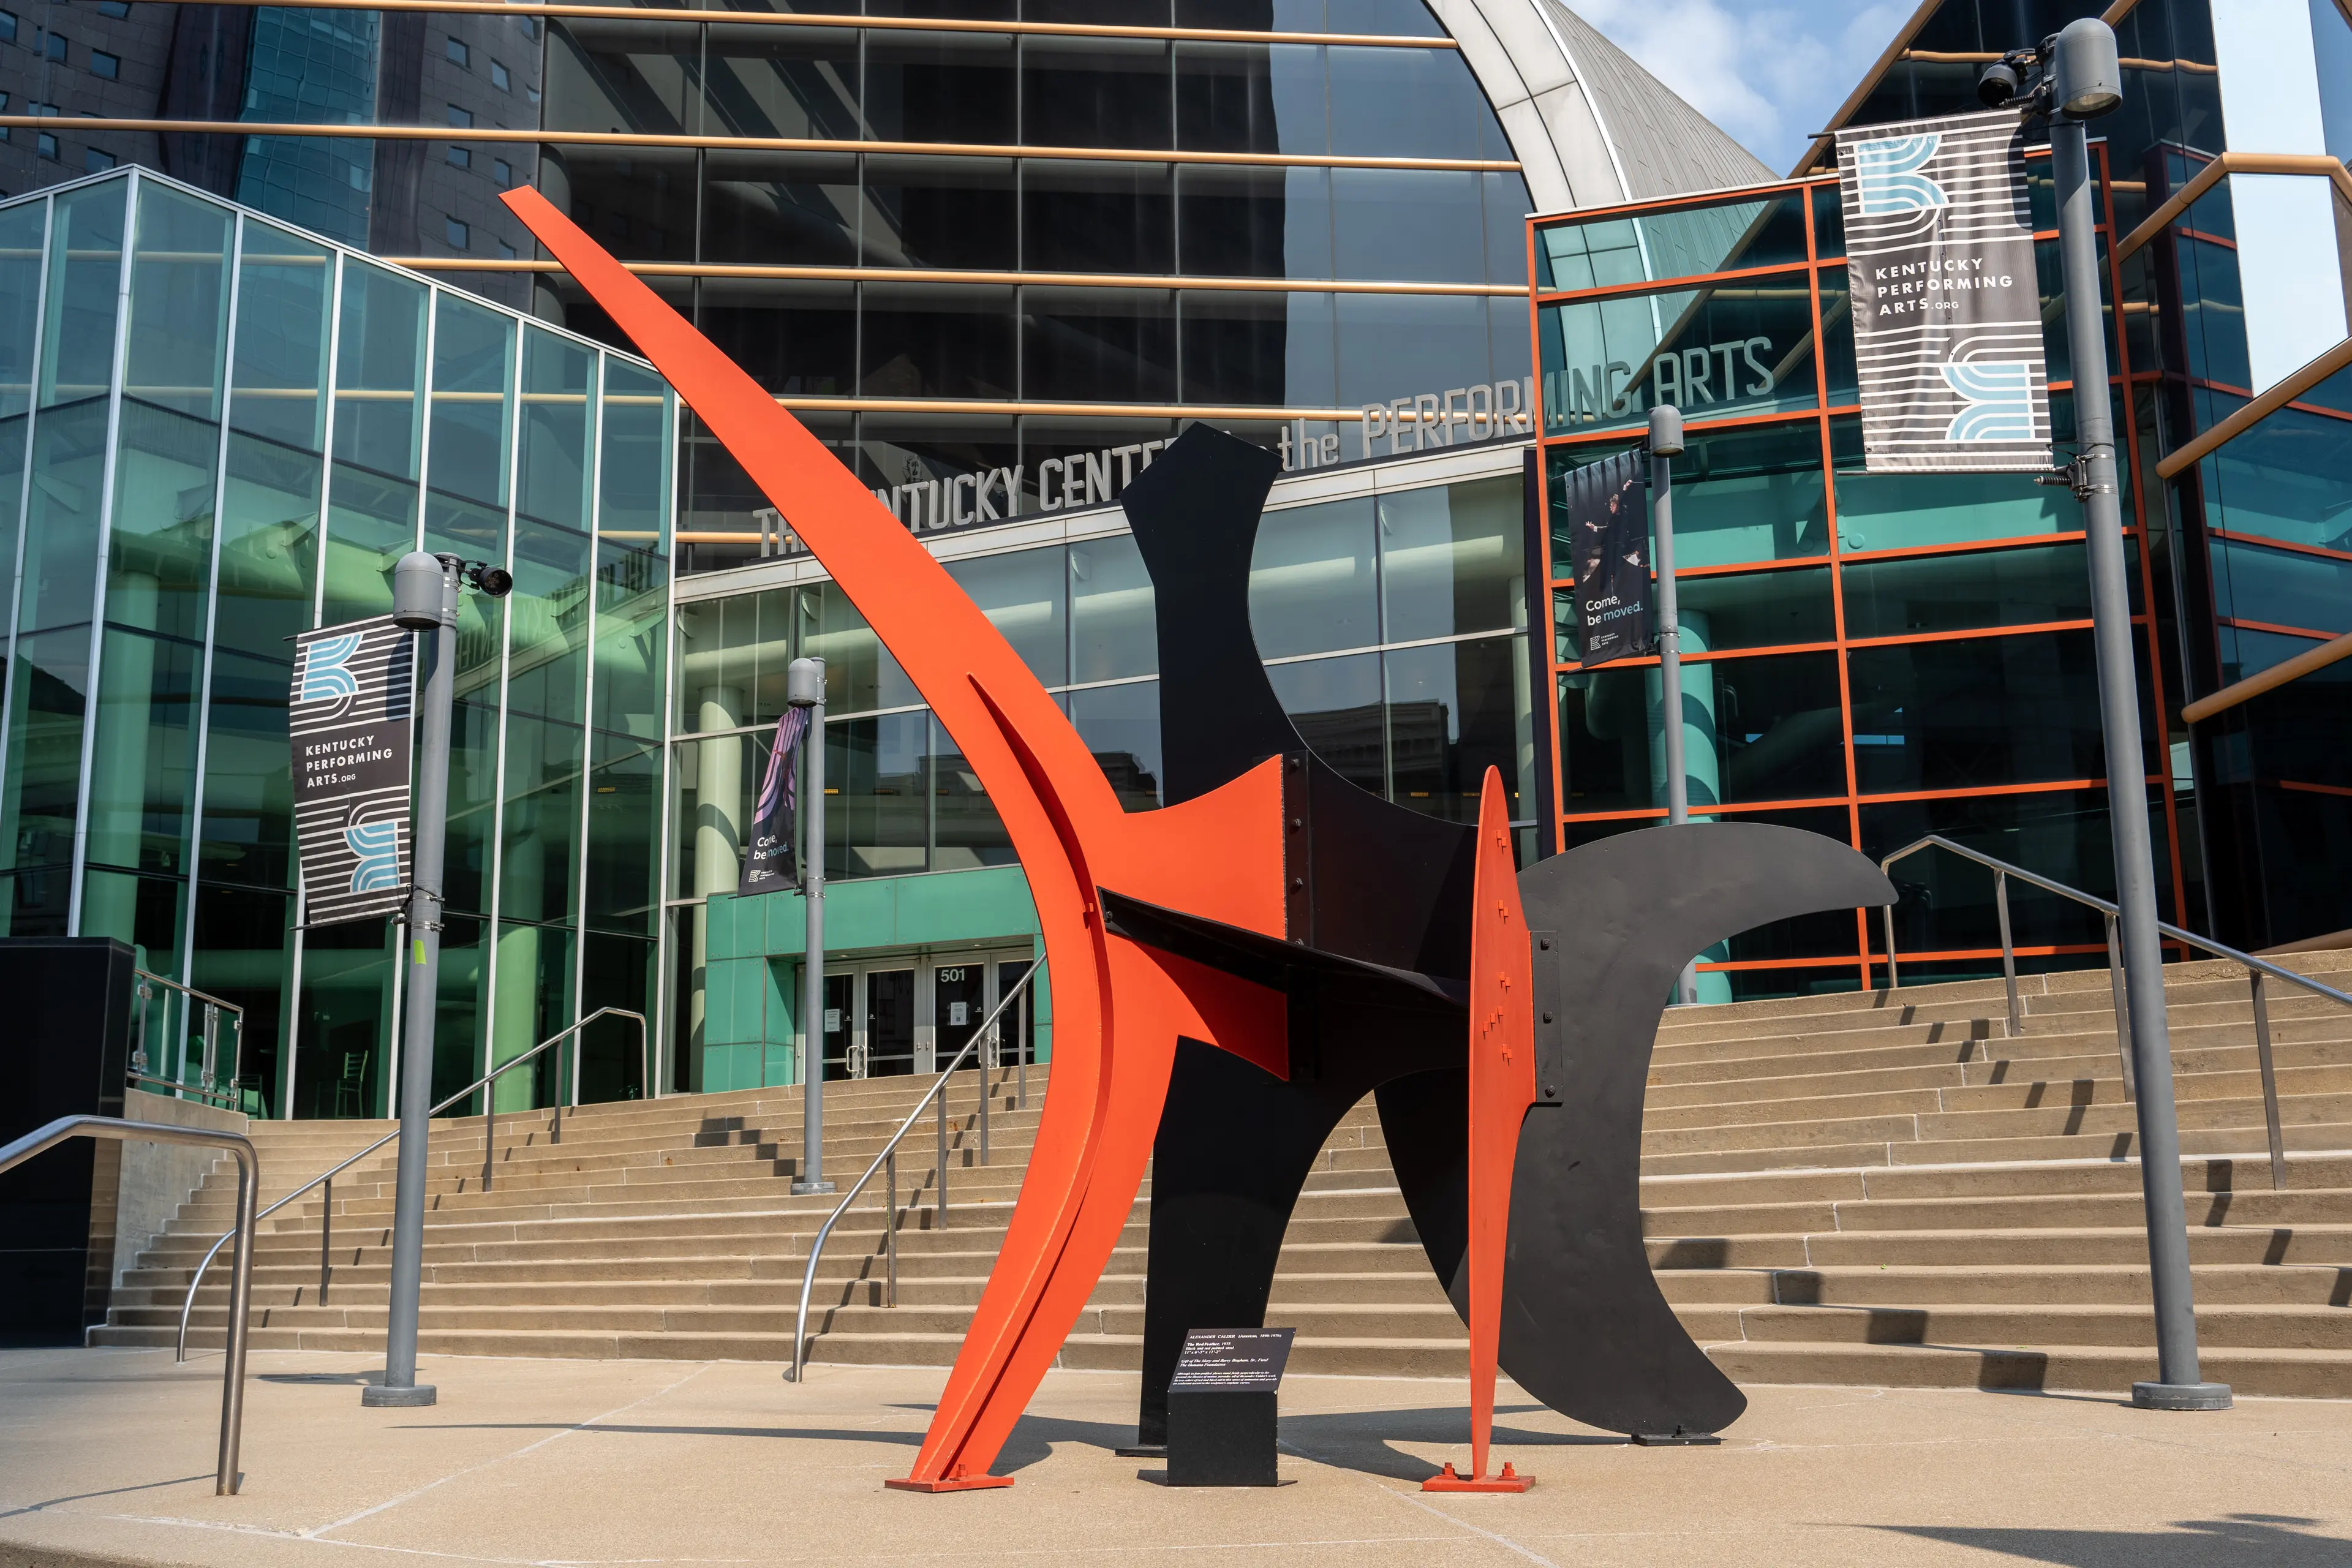 The Red Feather sculpture by Alexander Calder sits in front of The Kentucky Center for the Performing Arts